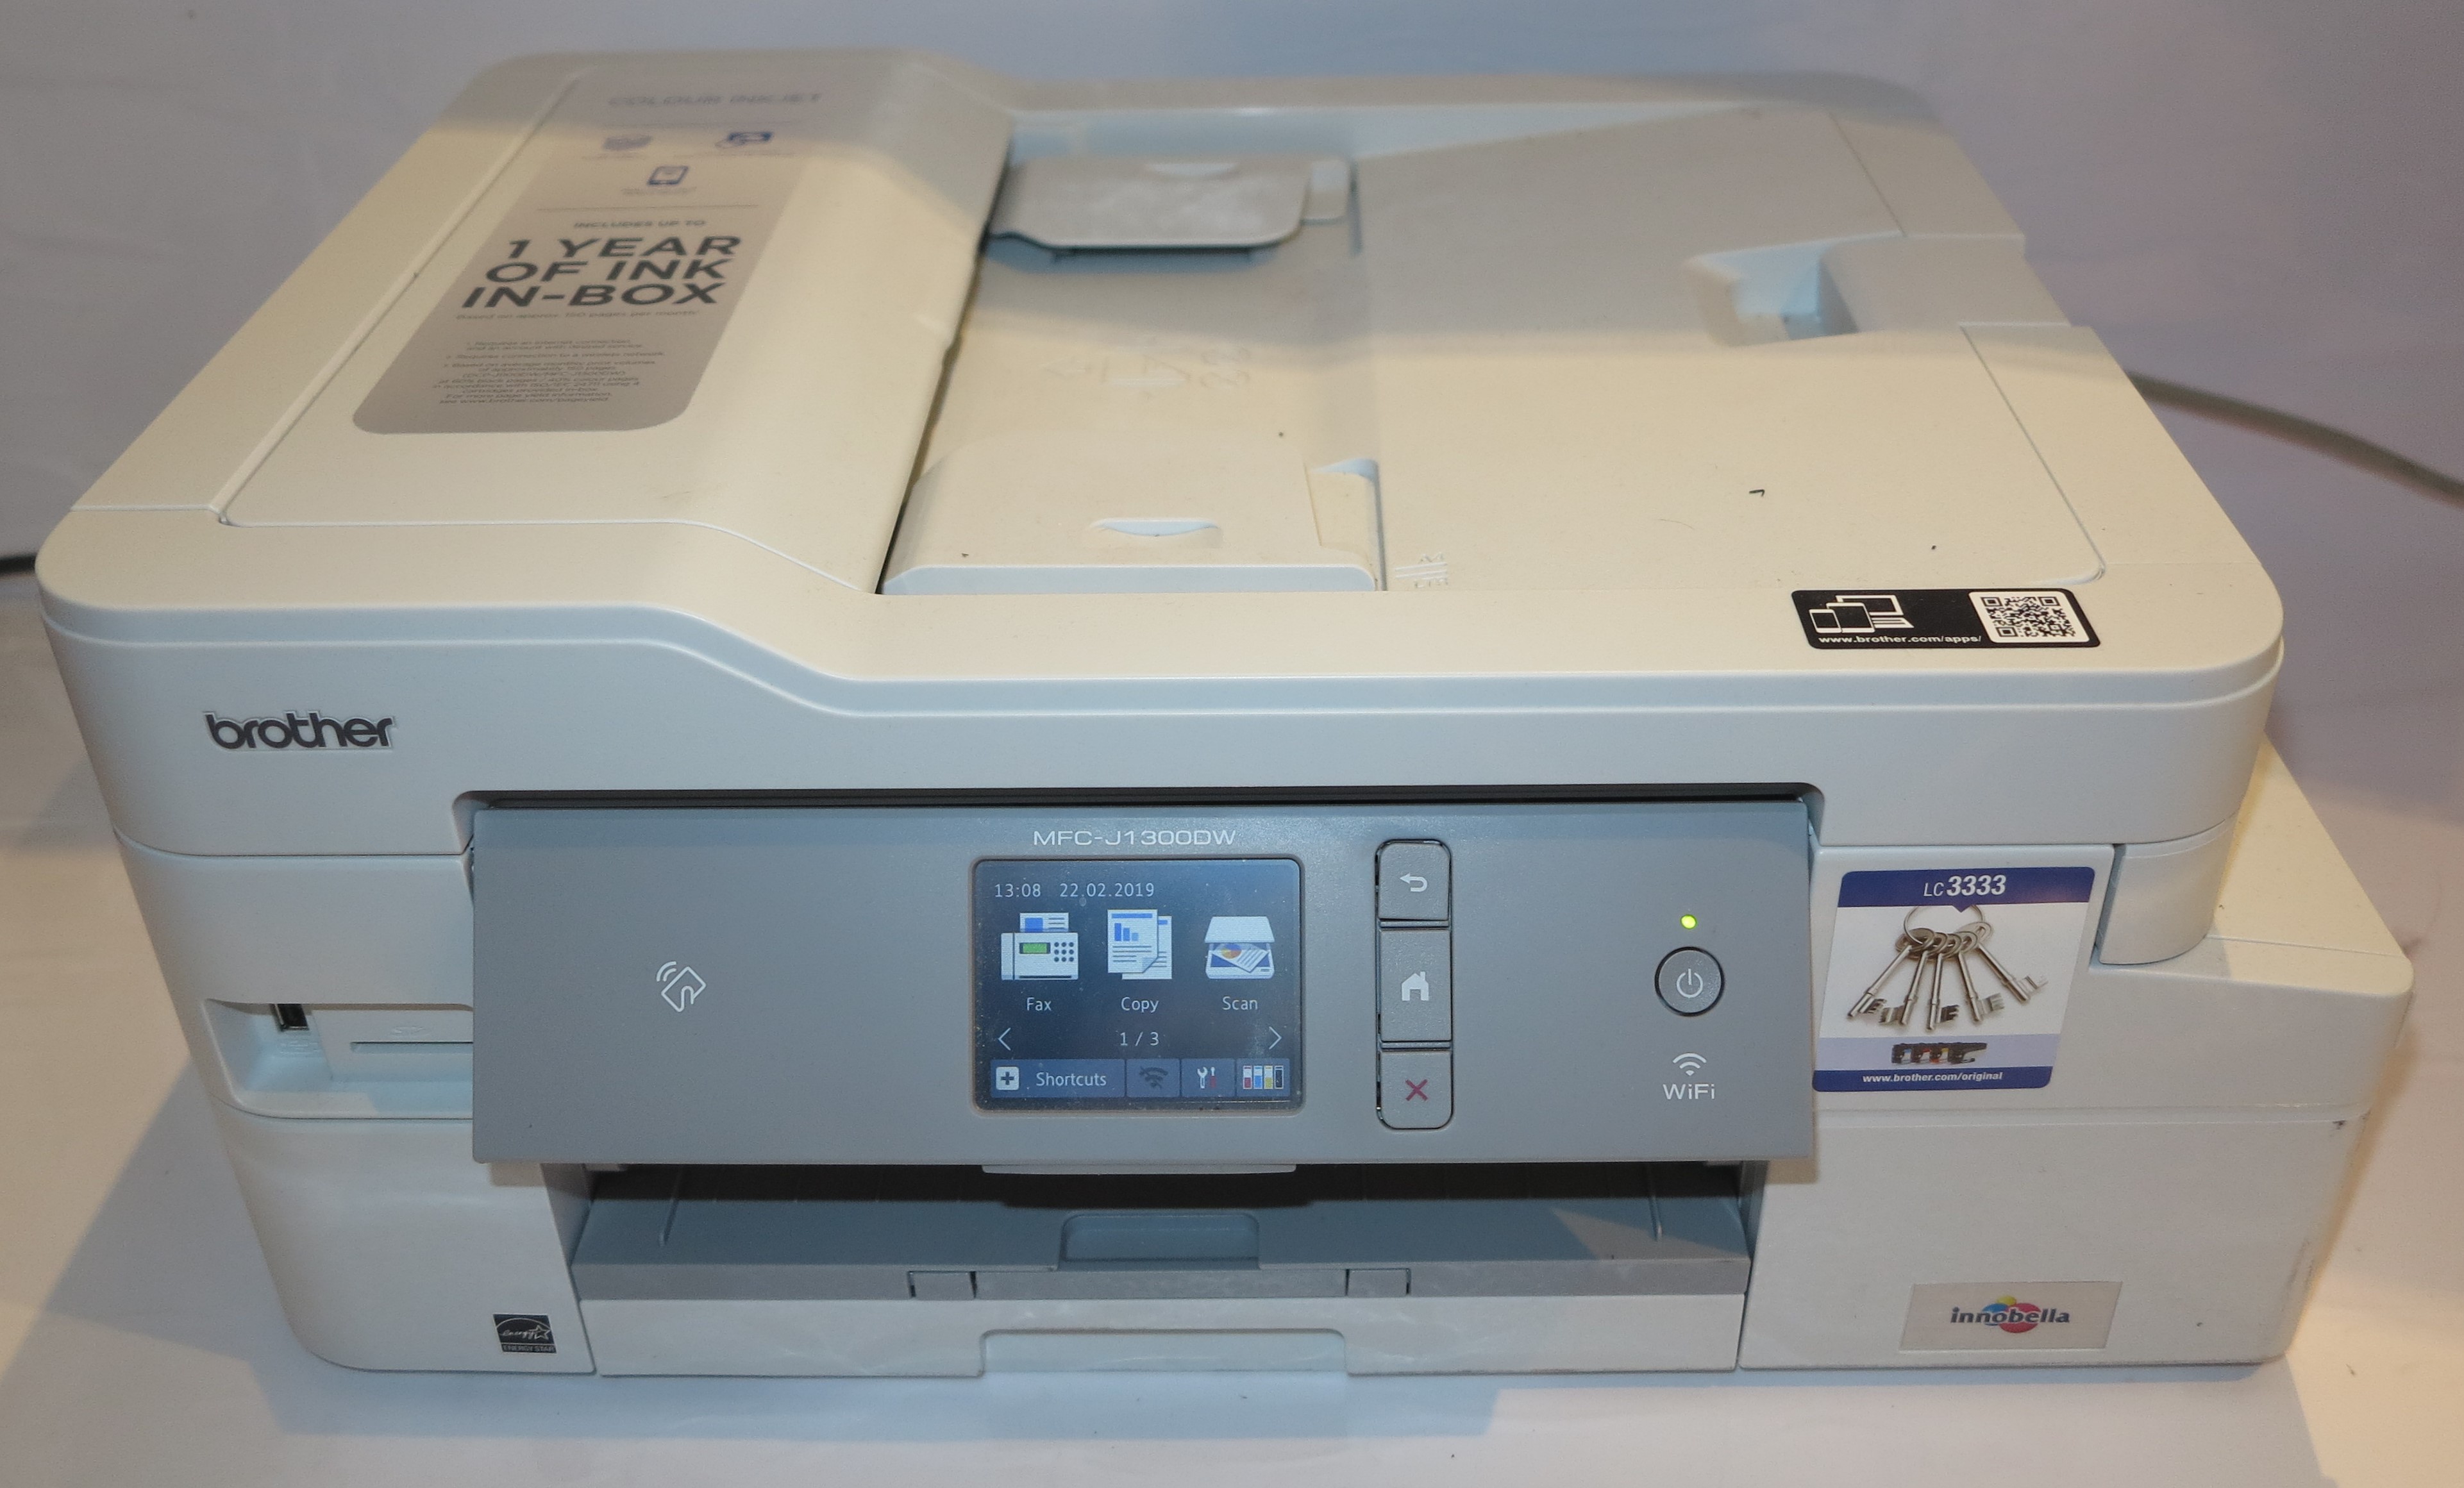 Product Review–Brother MFC-J1300DW INKVestment colour inkjet multifunction printer